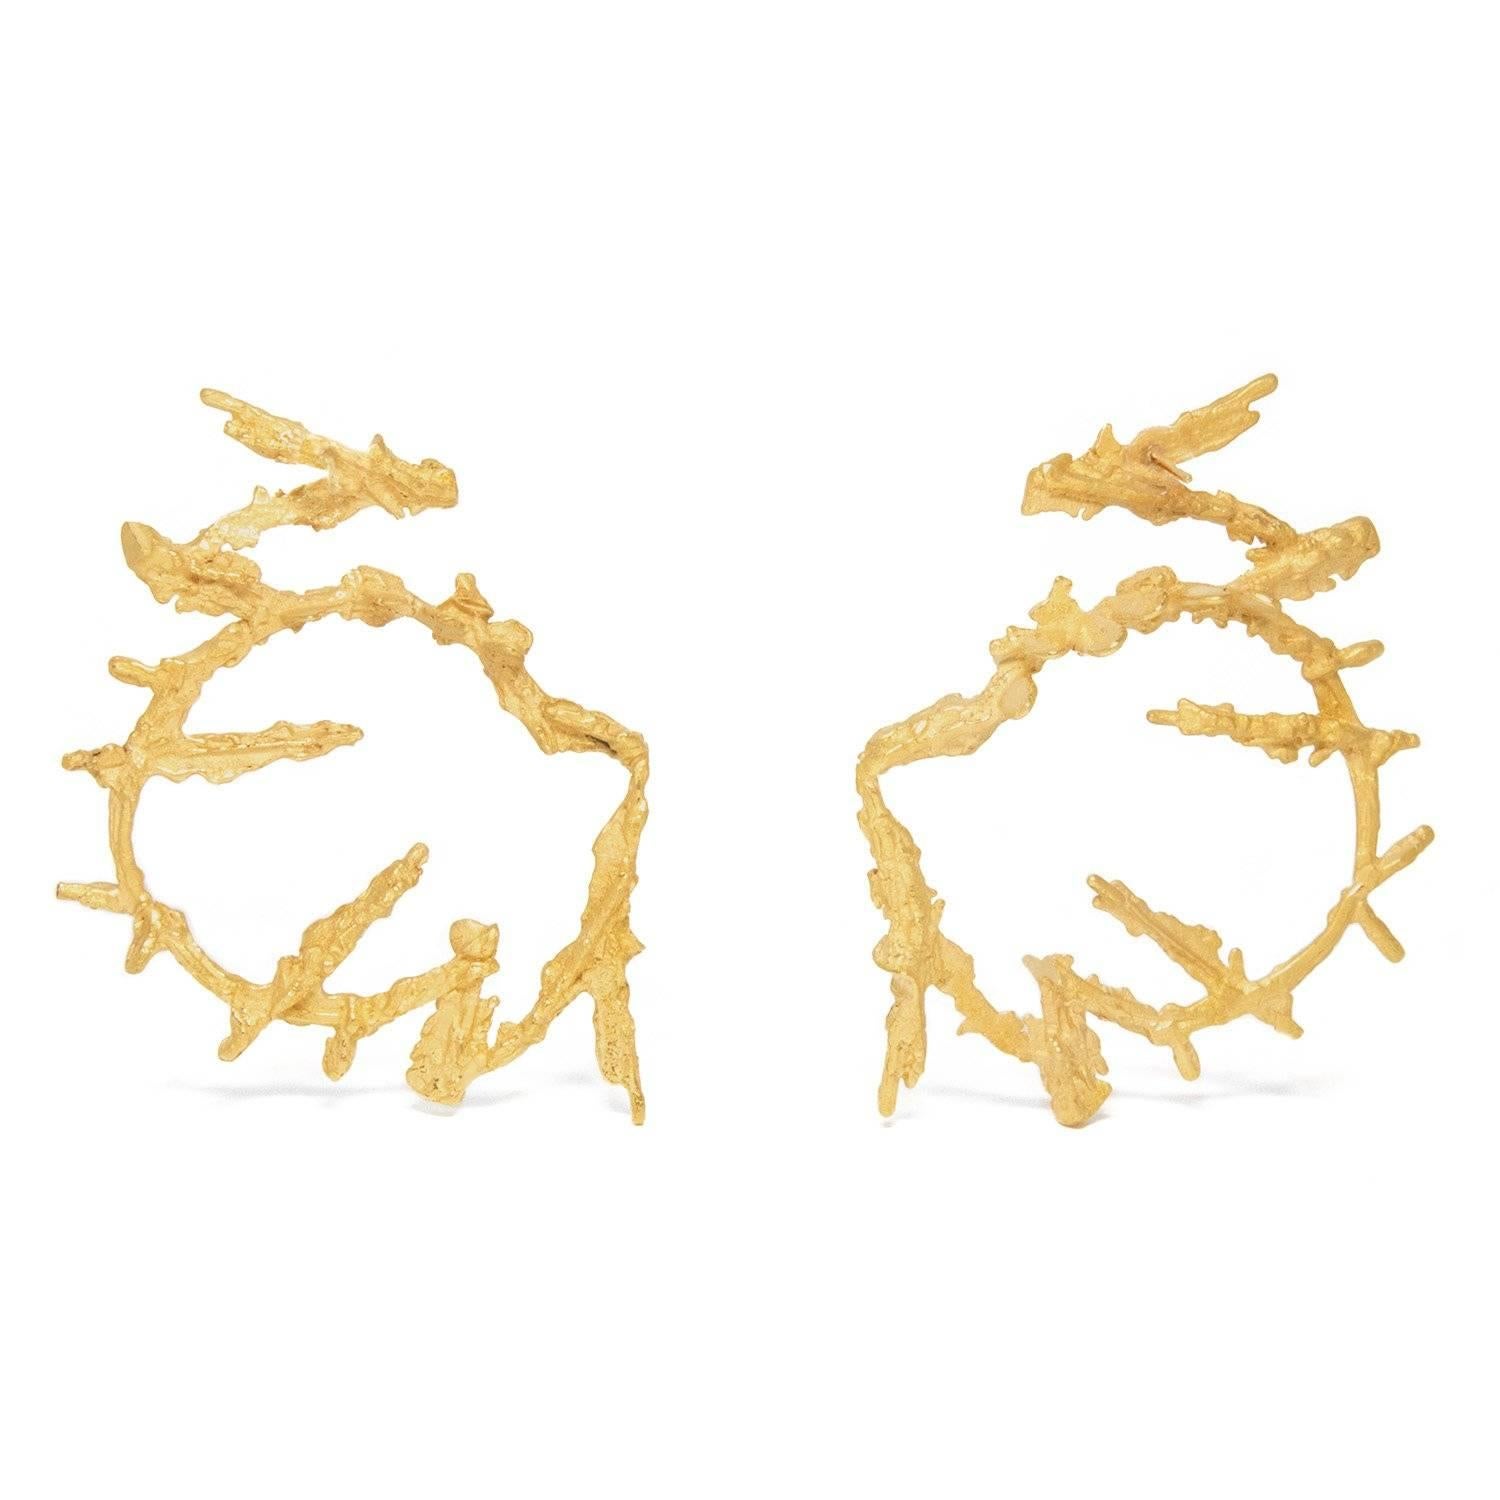 Maze: Passages and paths constructed as a puzzle.

Hoop earrings are in style at the moment, and I have jazzed-up the trend with these super-sized shapes, formed of textured rings contrasted with needle-like fragments. These features all combine to